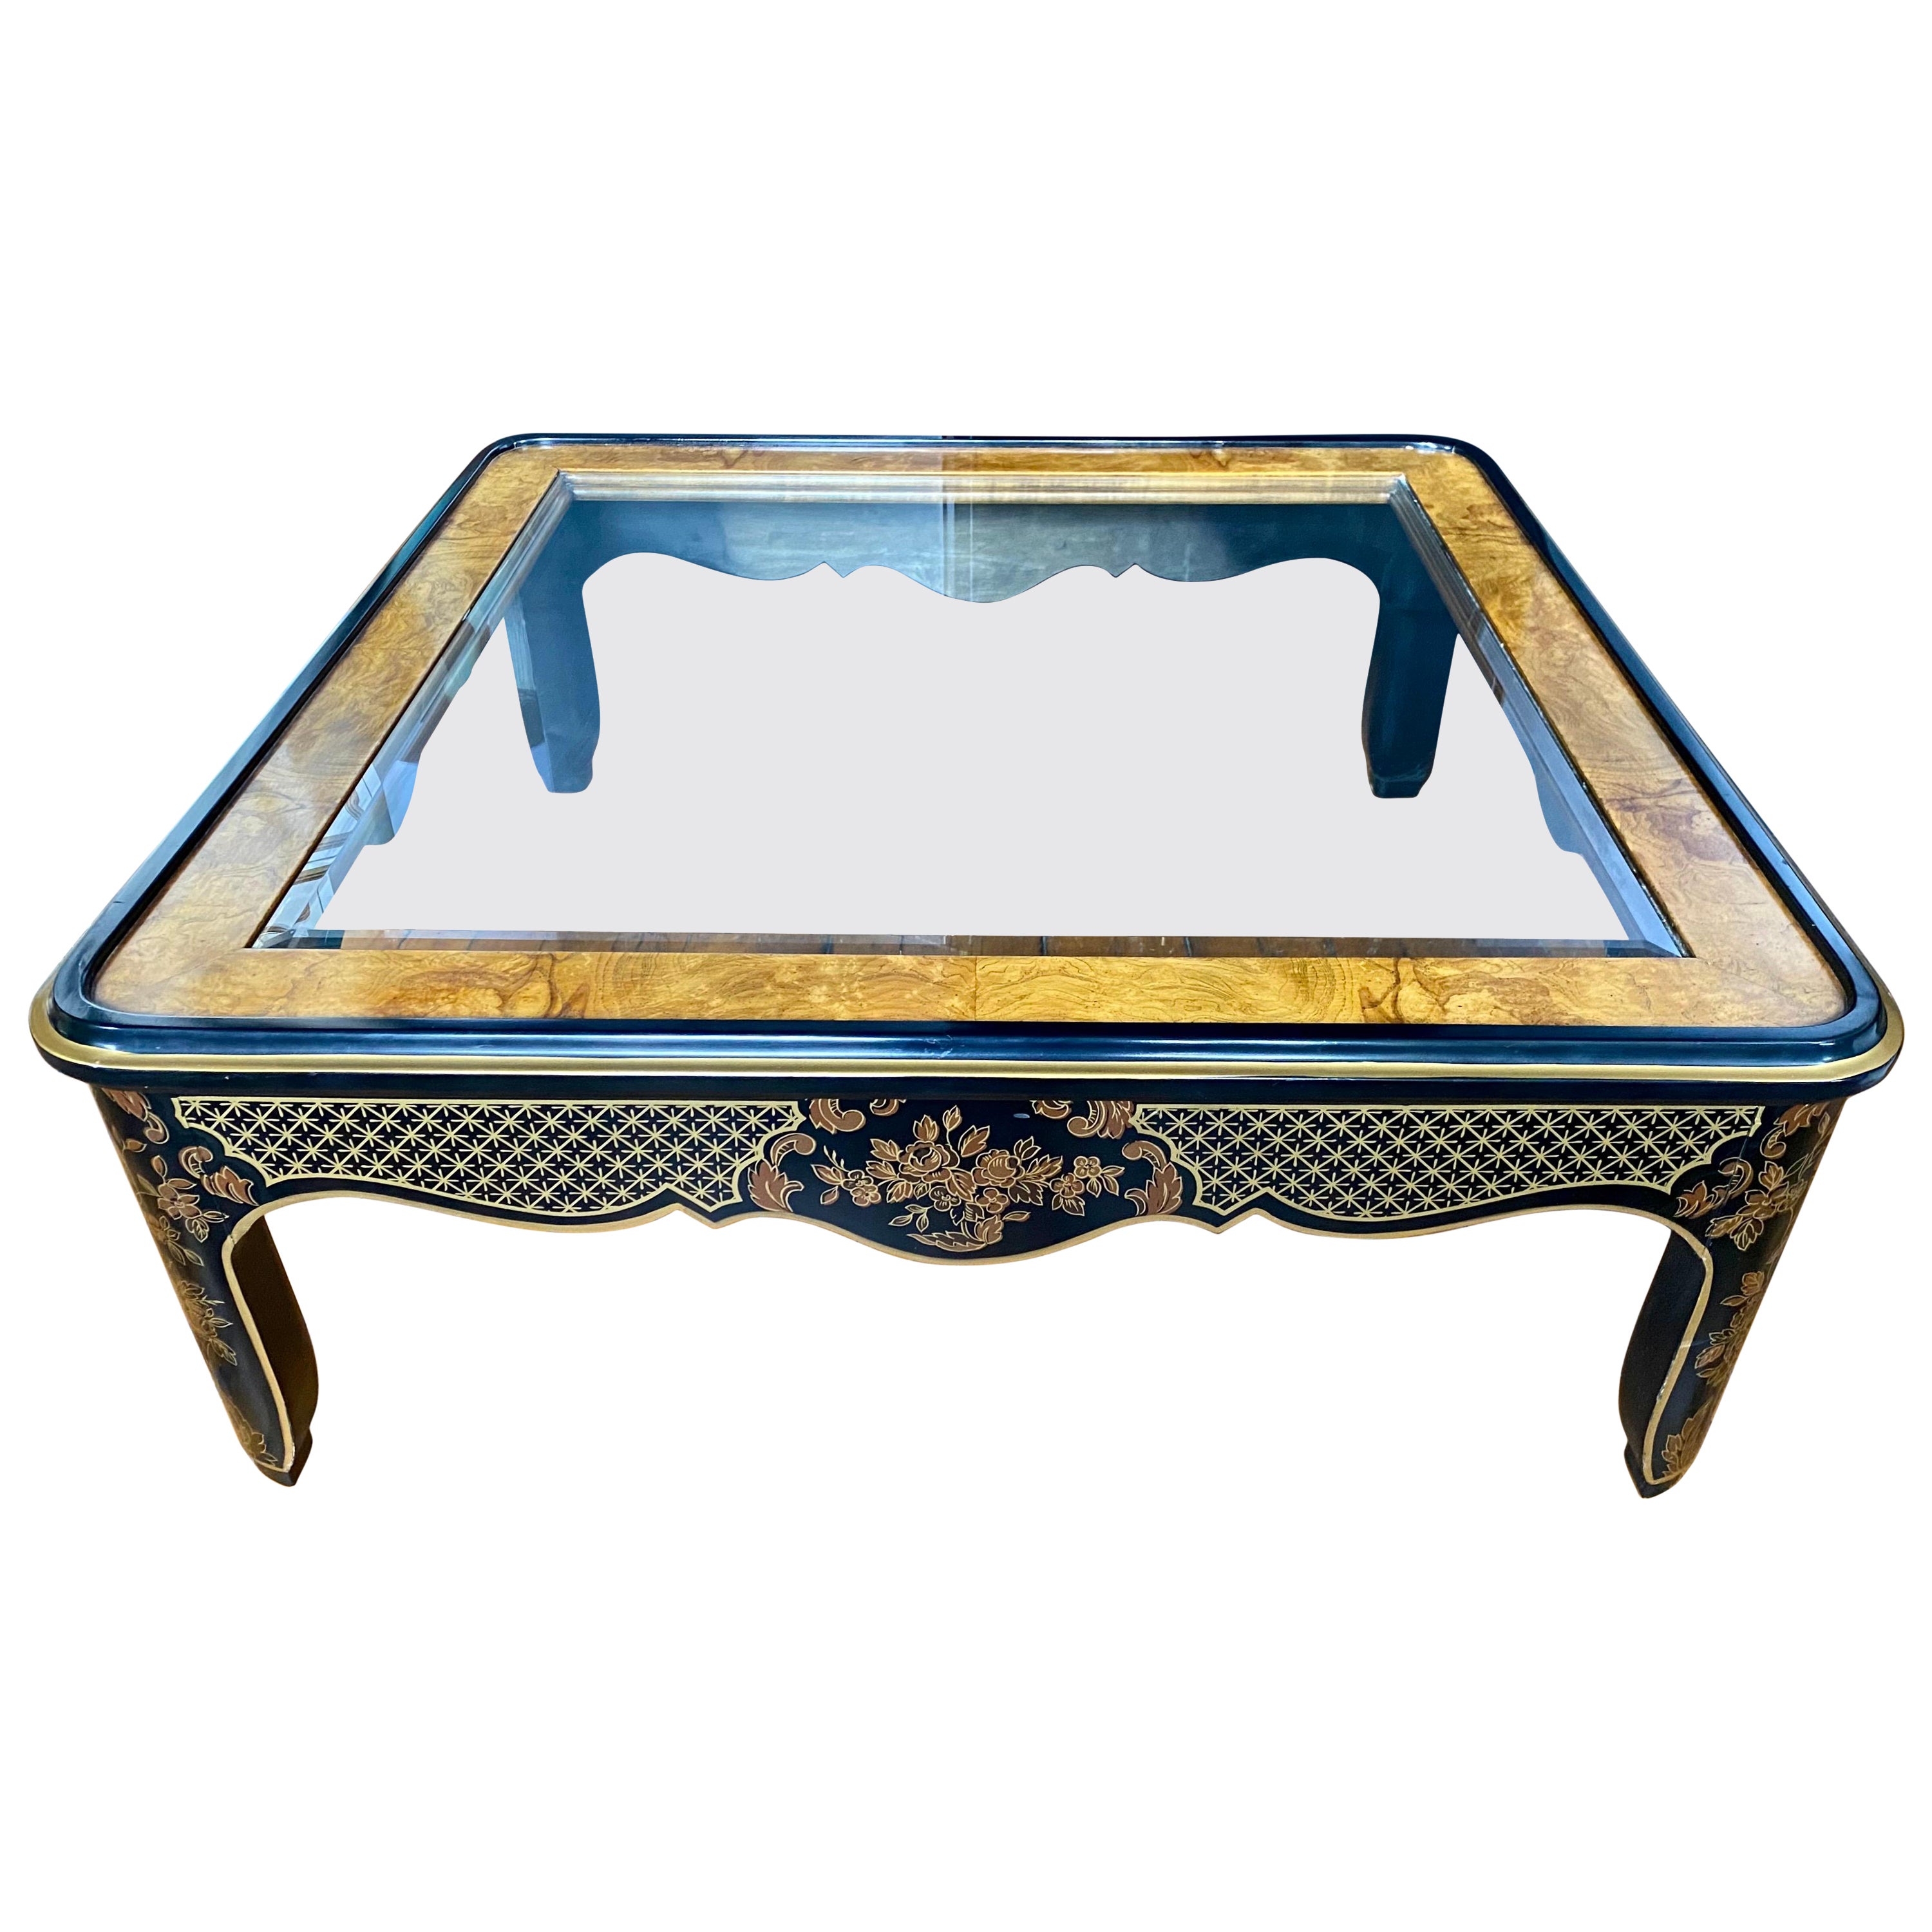 Hollywood Regency Chinoiserie Black & Gold Square Coffee Table, Drexel Et Cetera